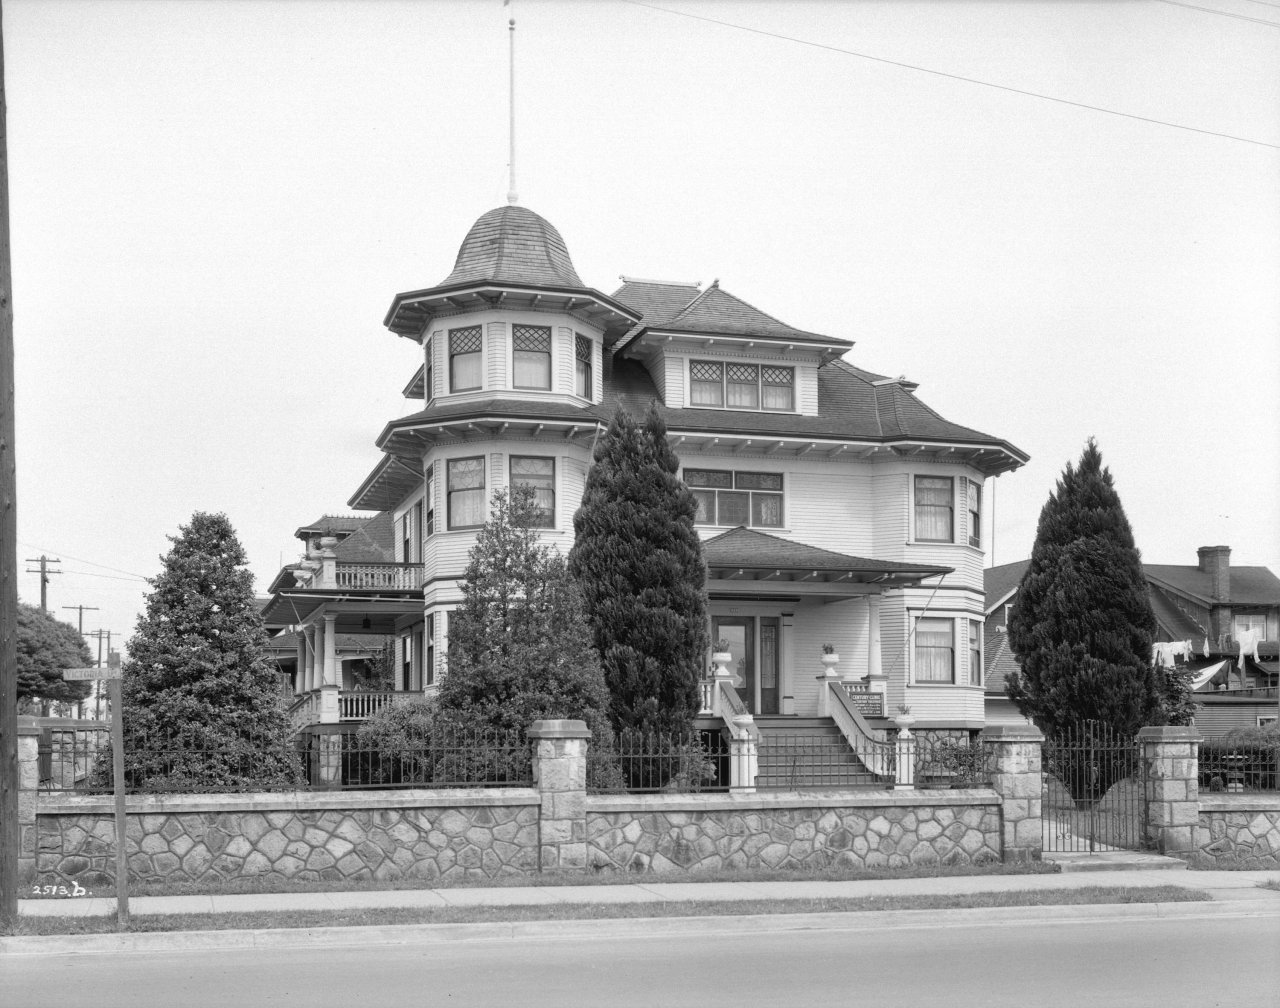 Residence of Captain Copp at 1110 Victoria Drive. Source: City of Vancouver Archives 99-4159